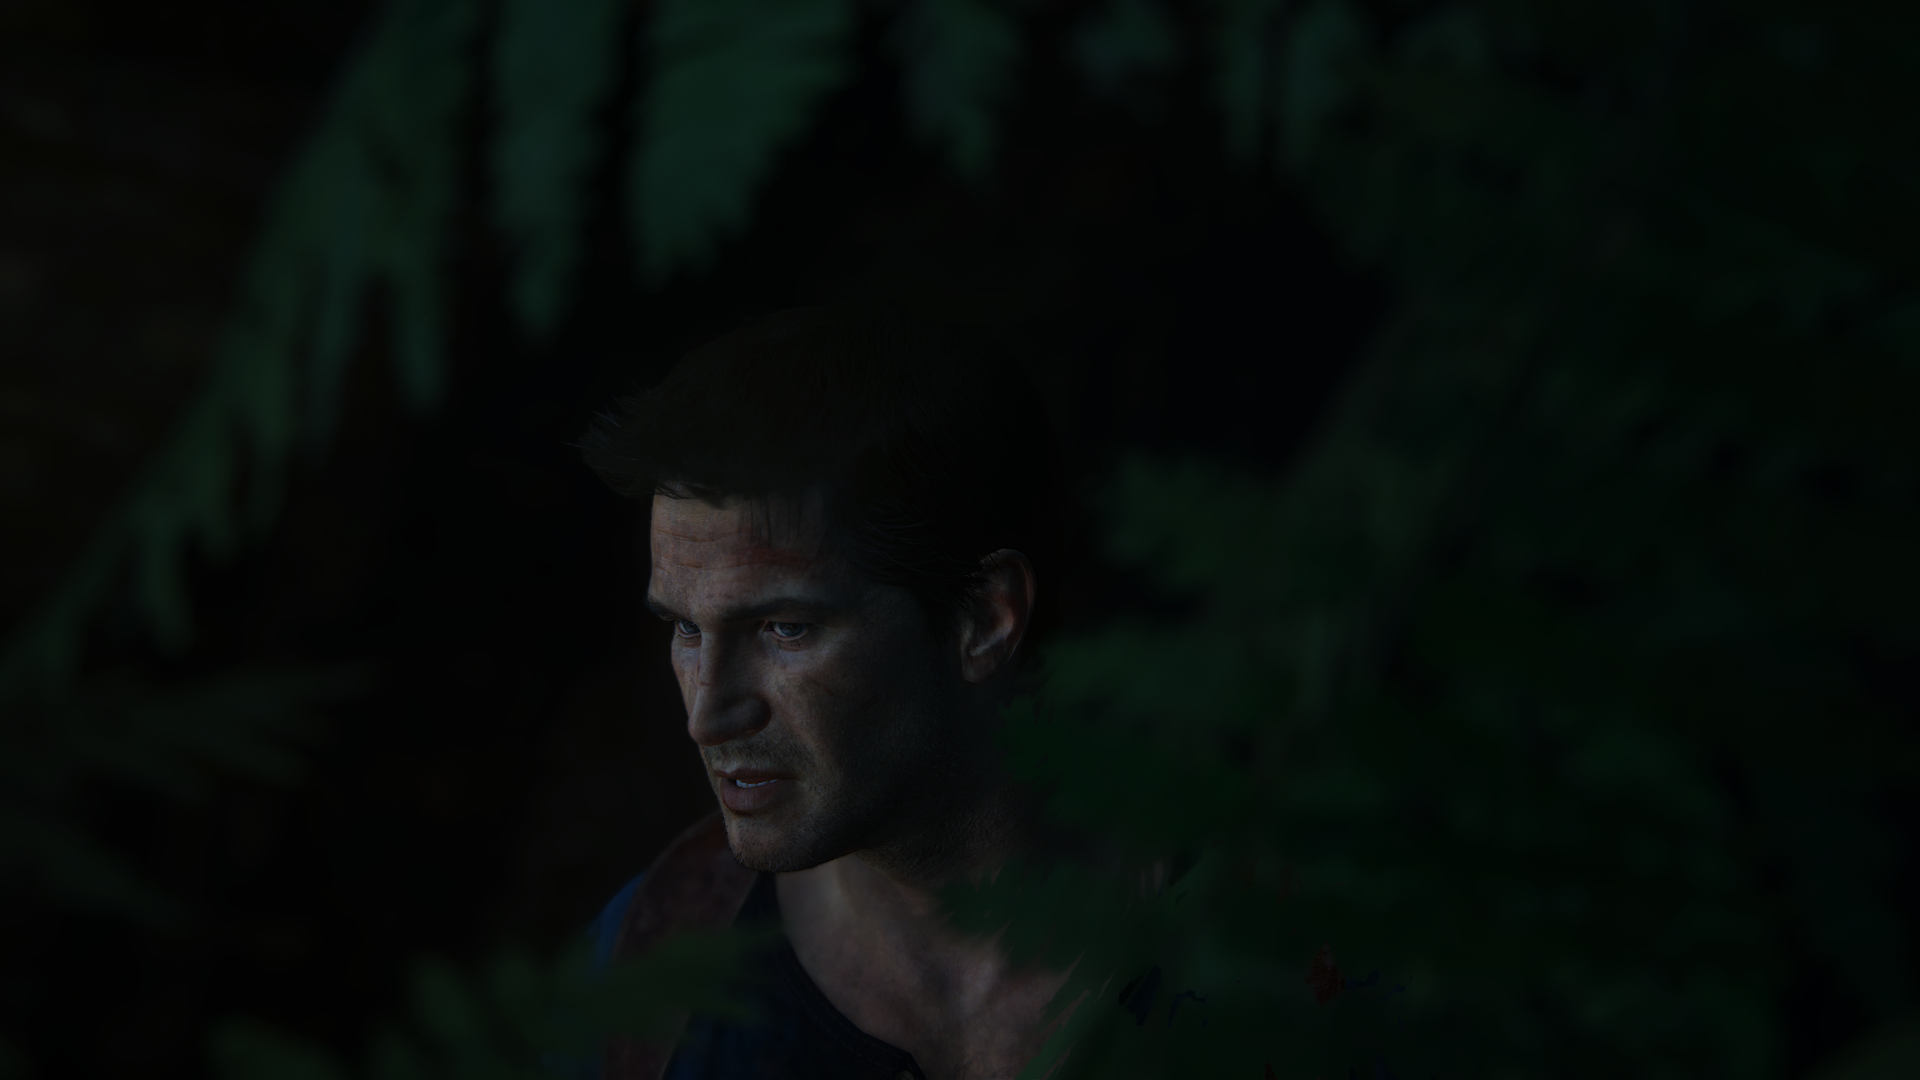 ab0Uncharted4AThiefsEnd.png